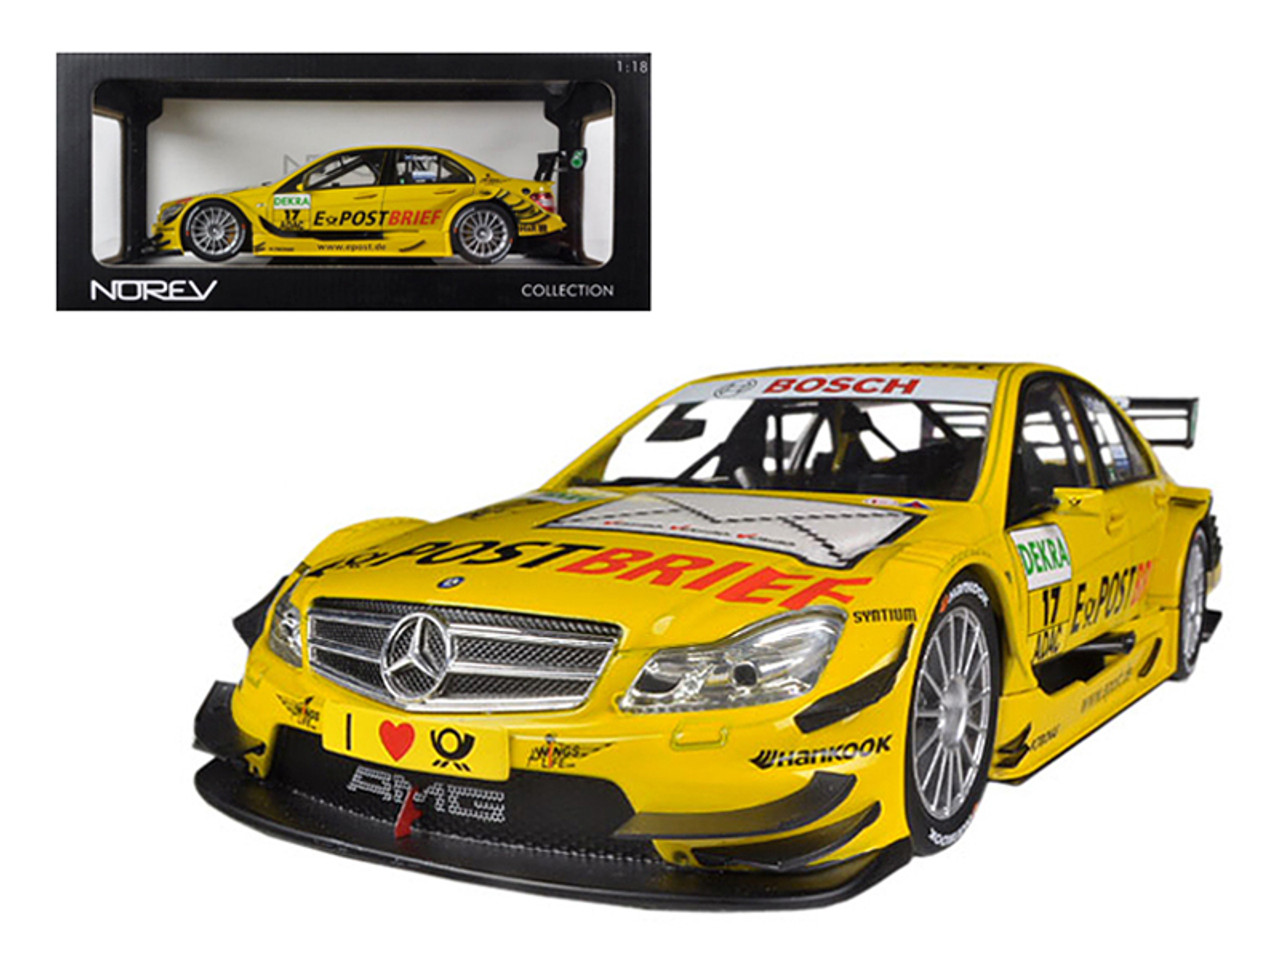 Mercedes C Class DTM 2011 #17 David Coulthard 1/18 Diecast Car Model by Norev